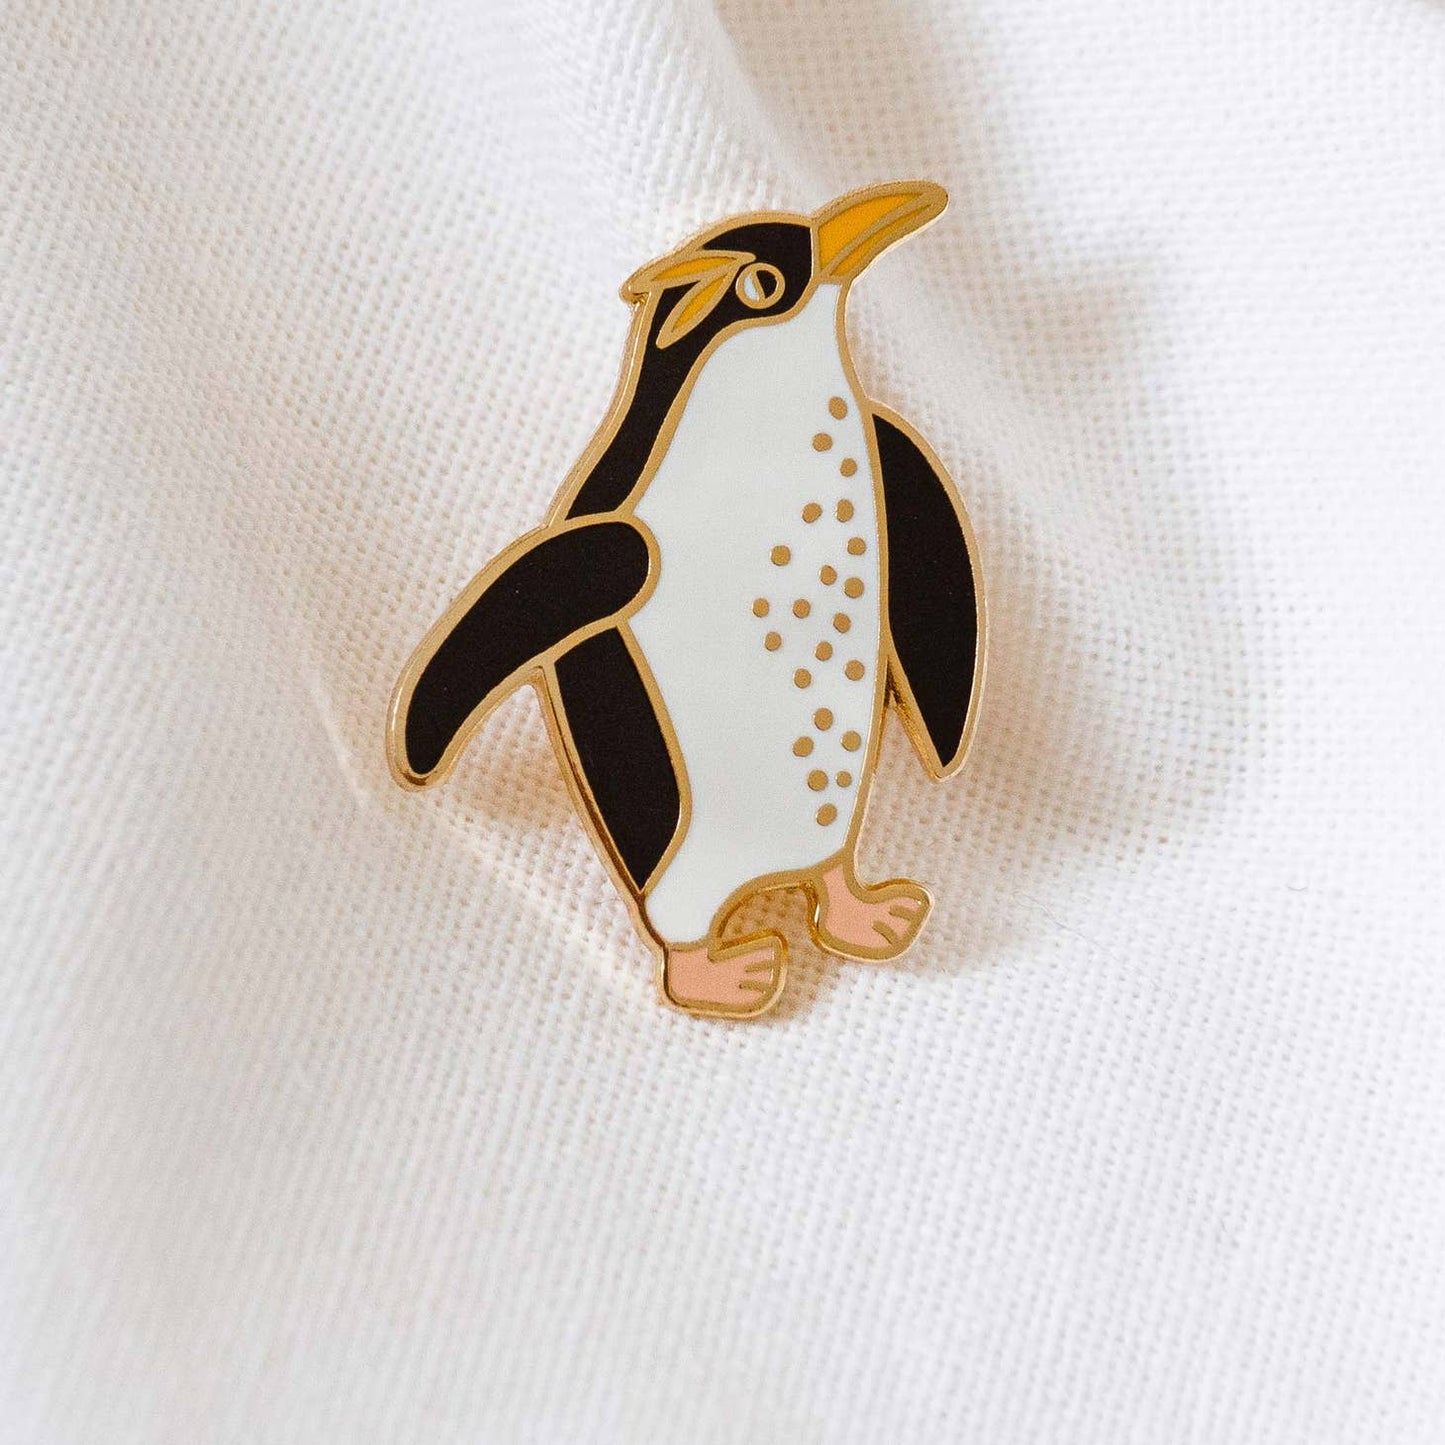 Penguin Enamel Pin - Mimi and August